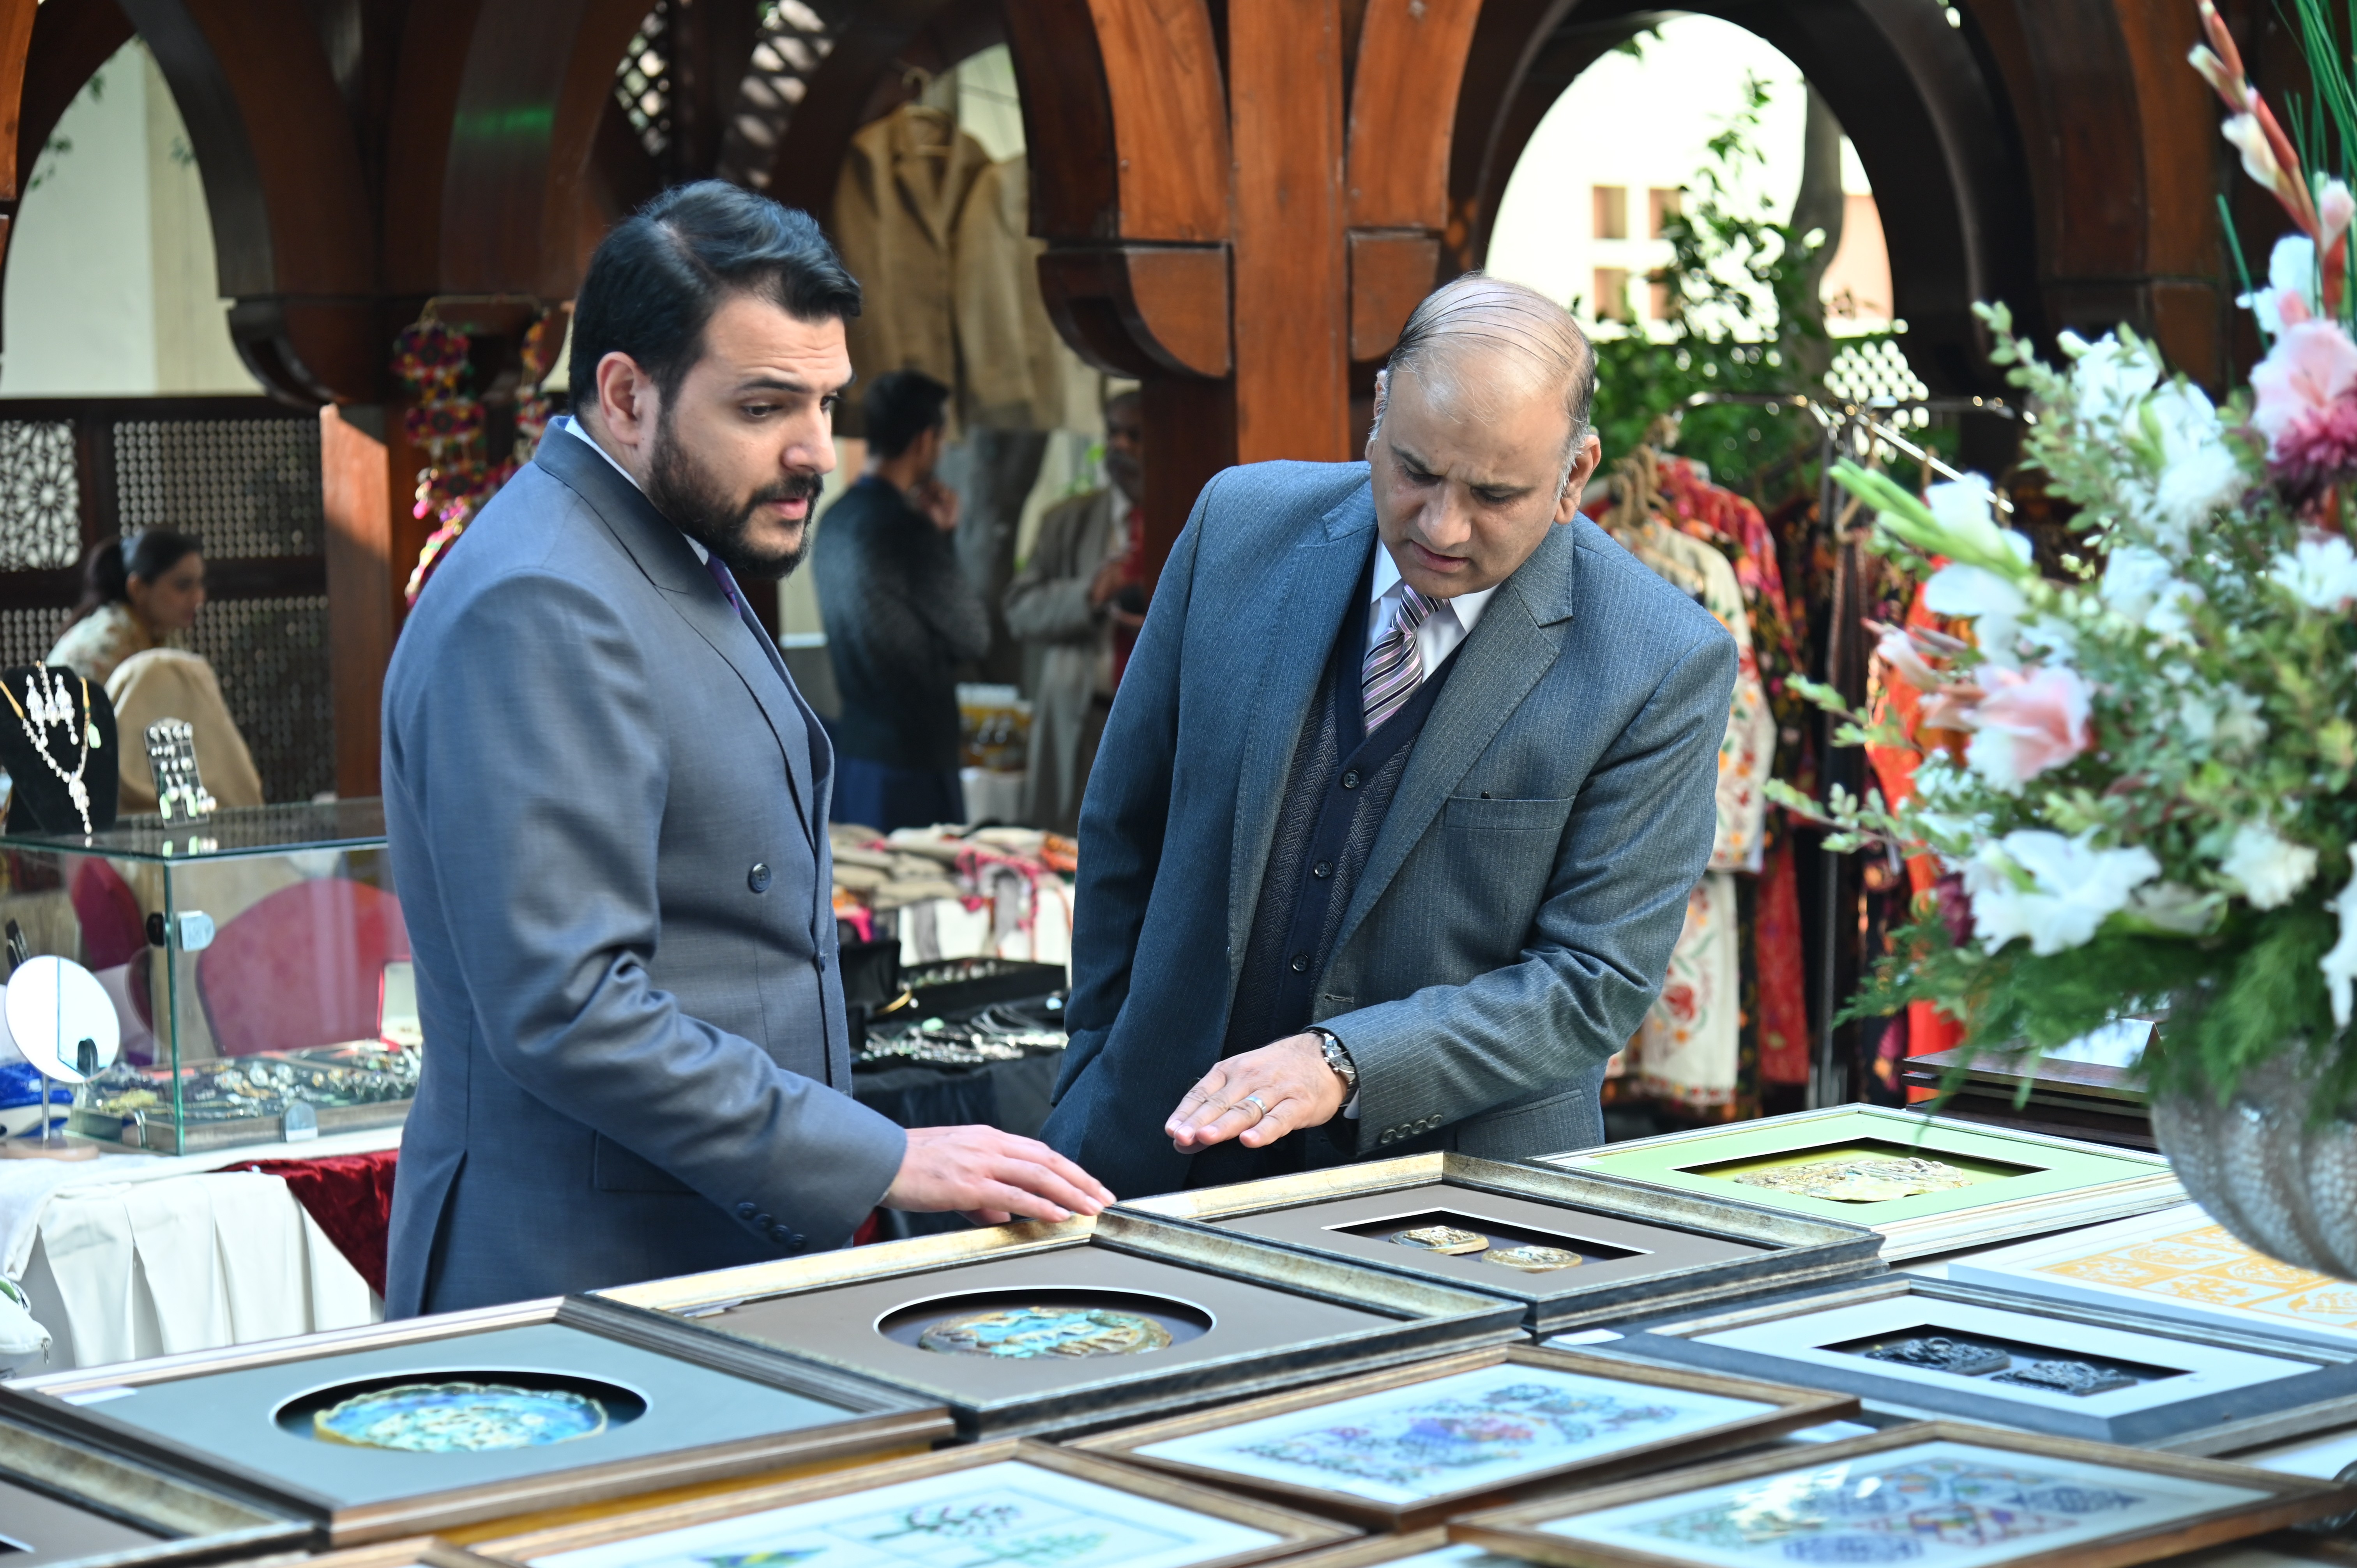 Visitors at the stall of colorful painting frames